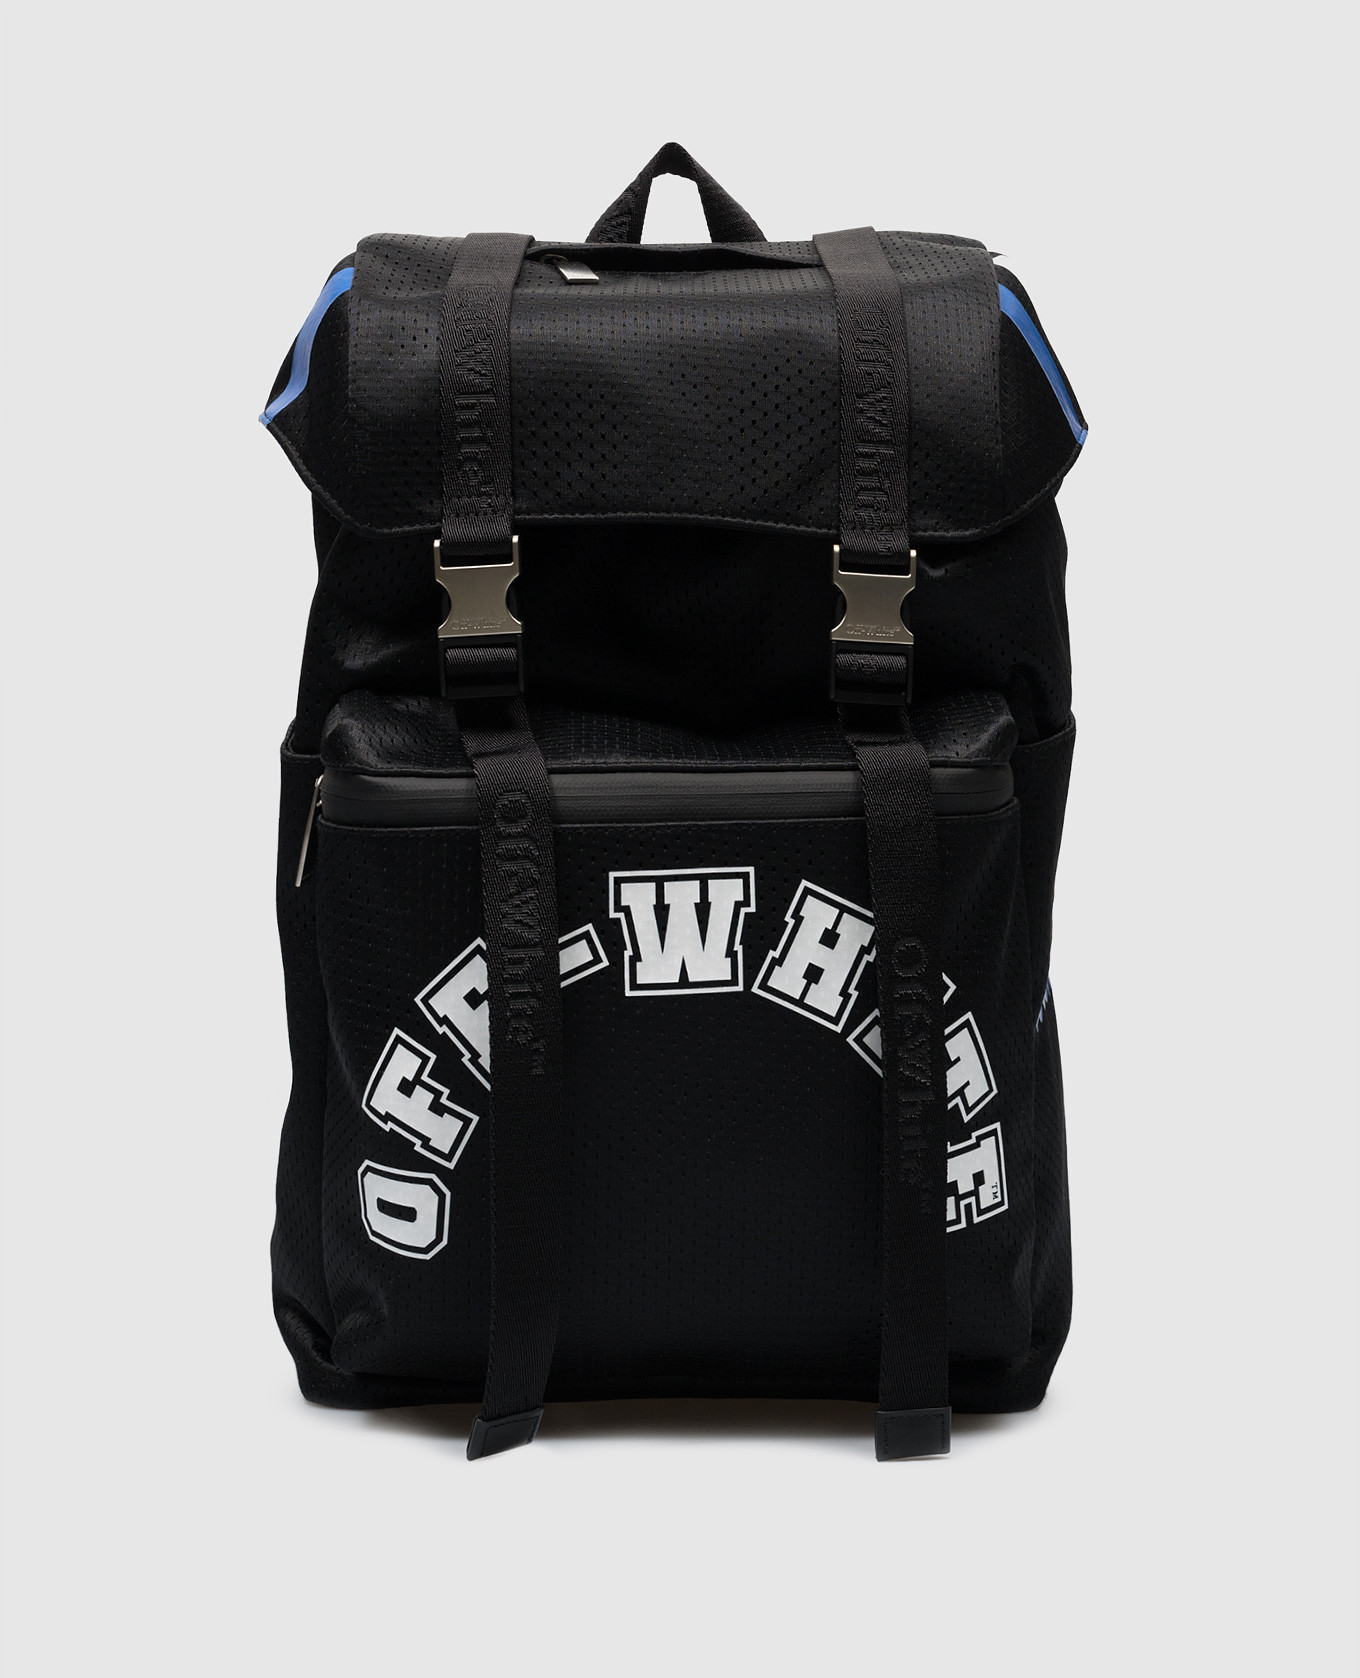 Black backpack with logo